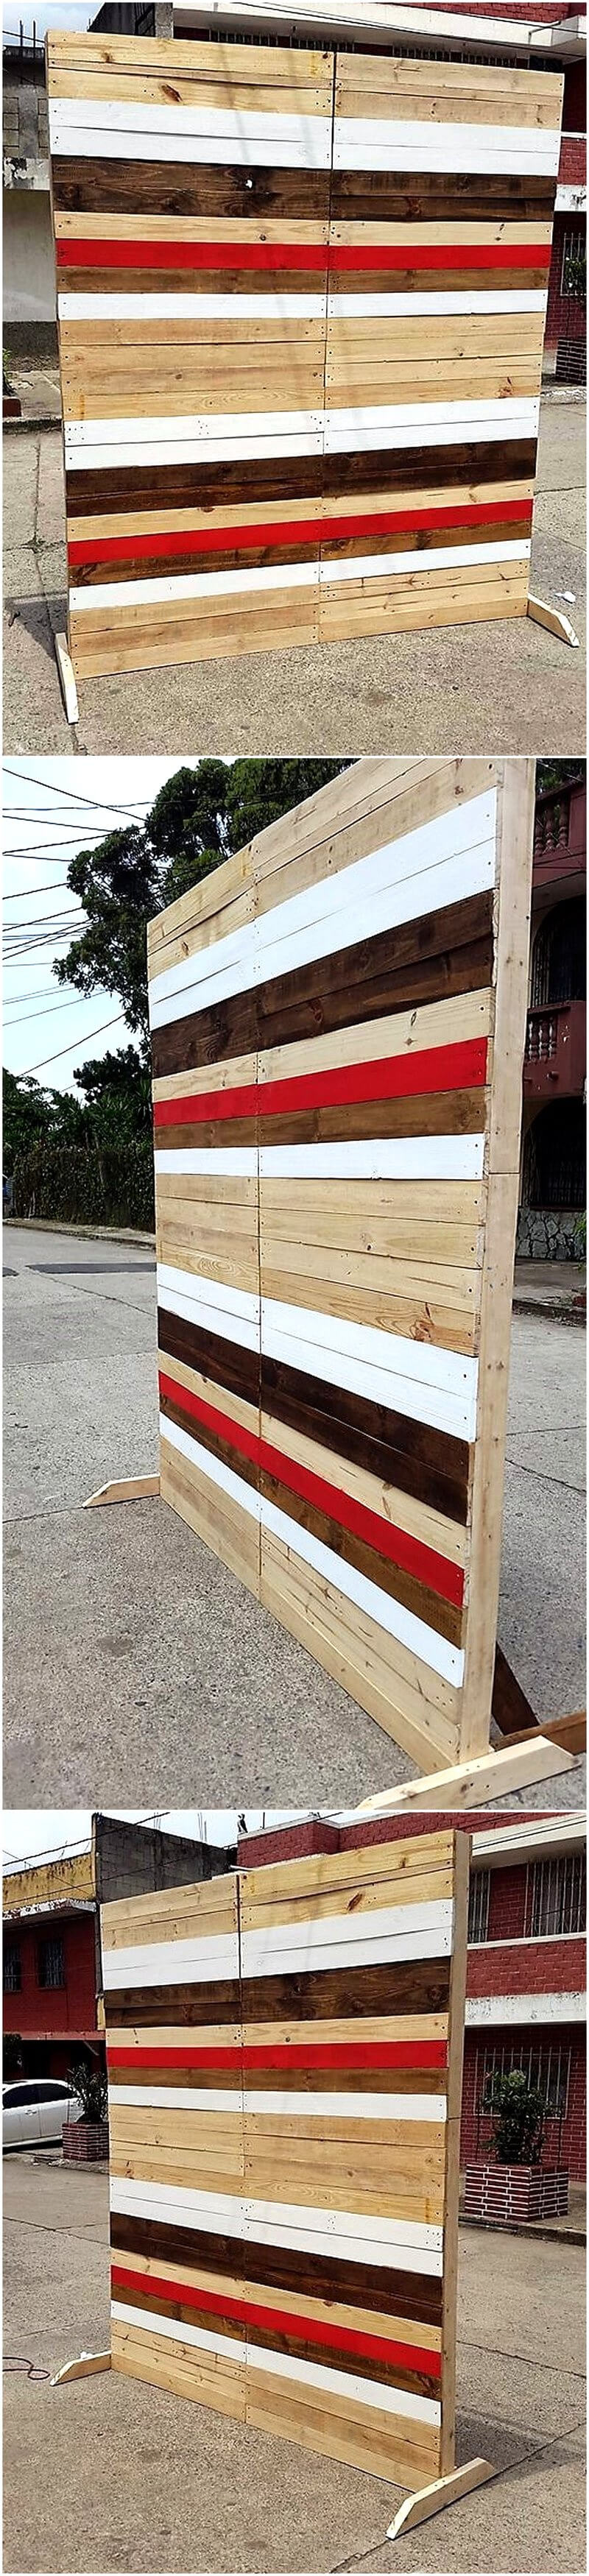 pallets space divider project